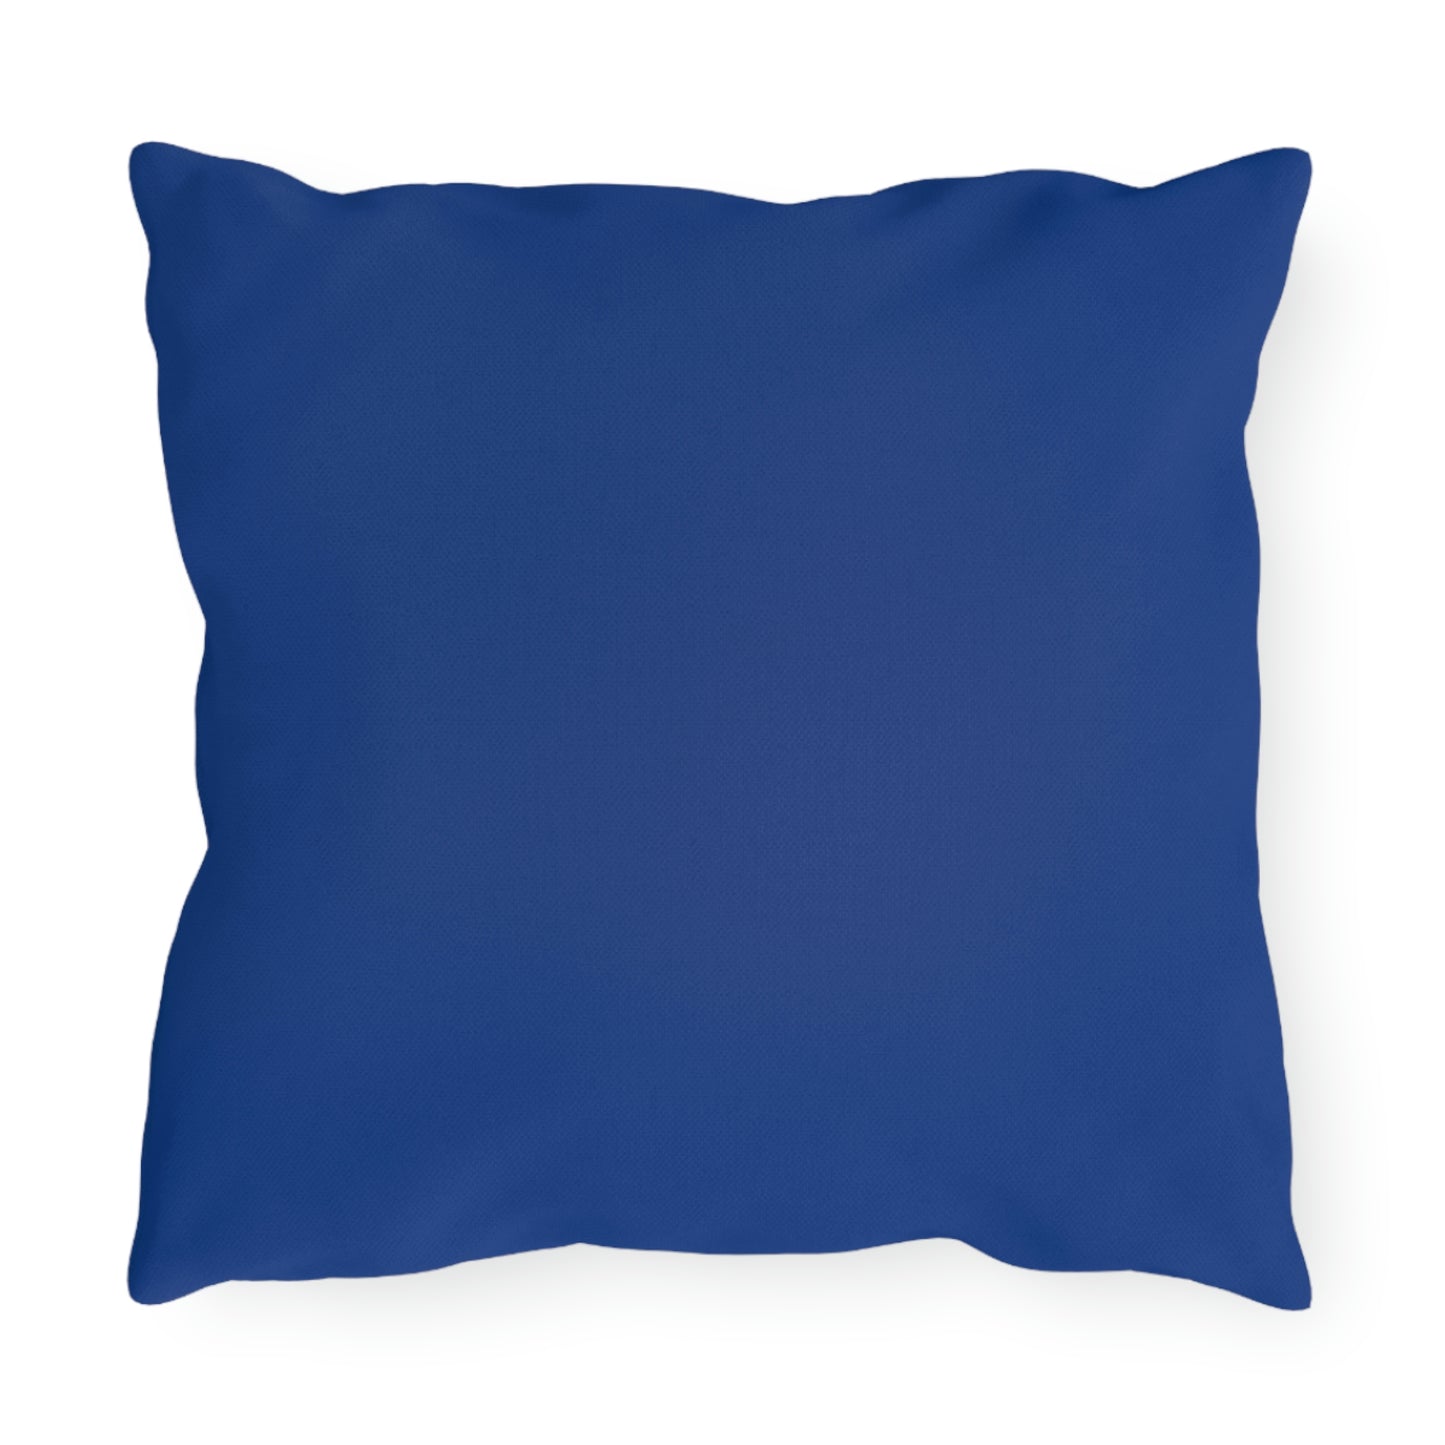 Red White & Blue Flower, Versatile Throw Pillow - Home or Office Decor